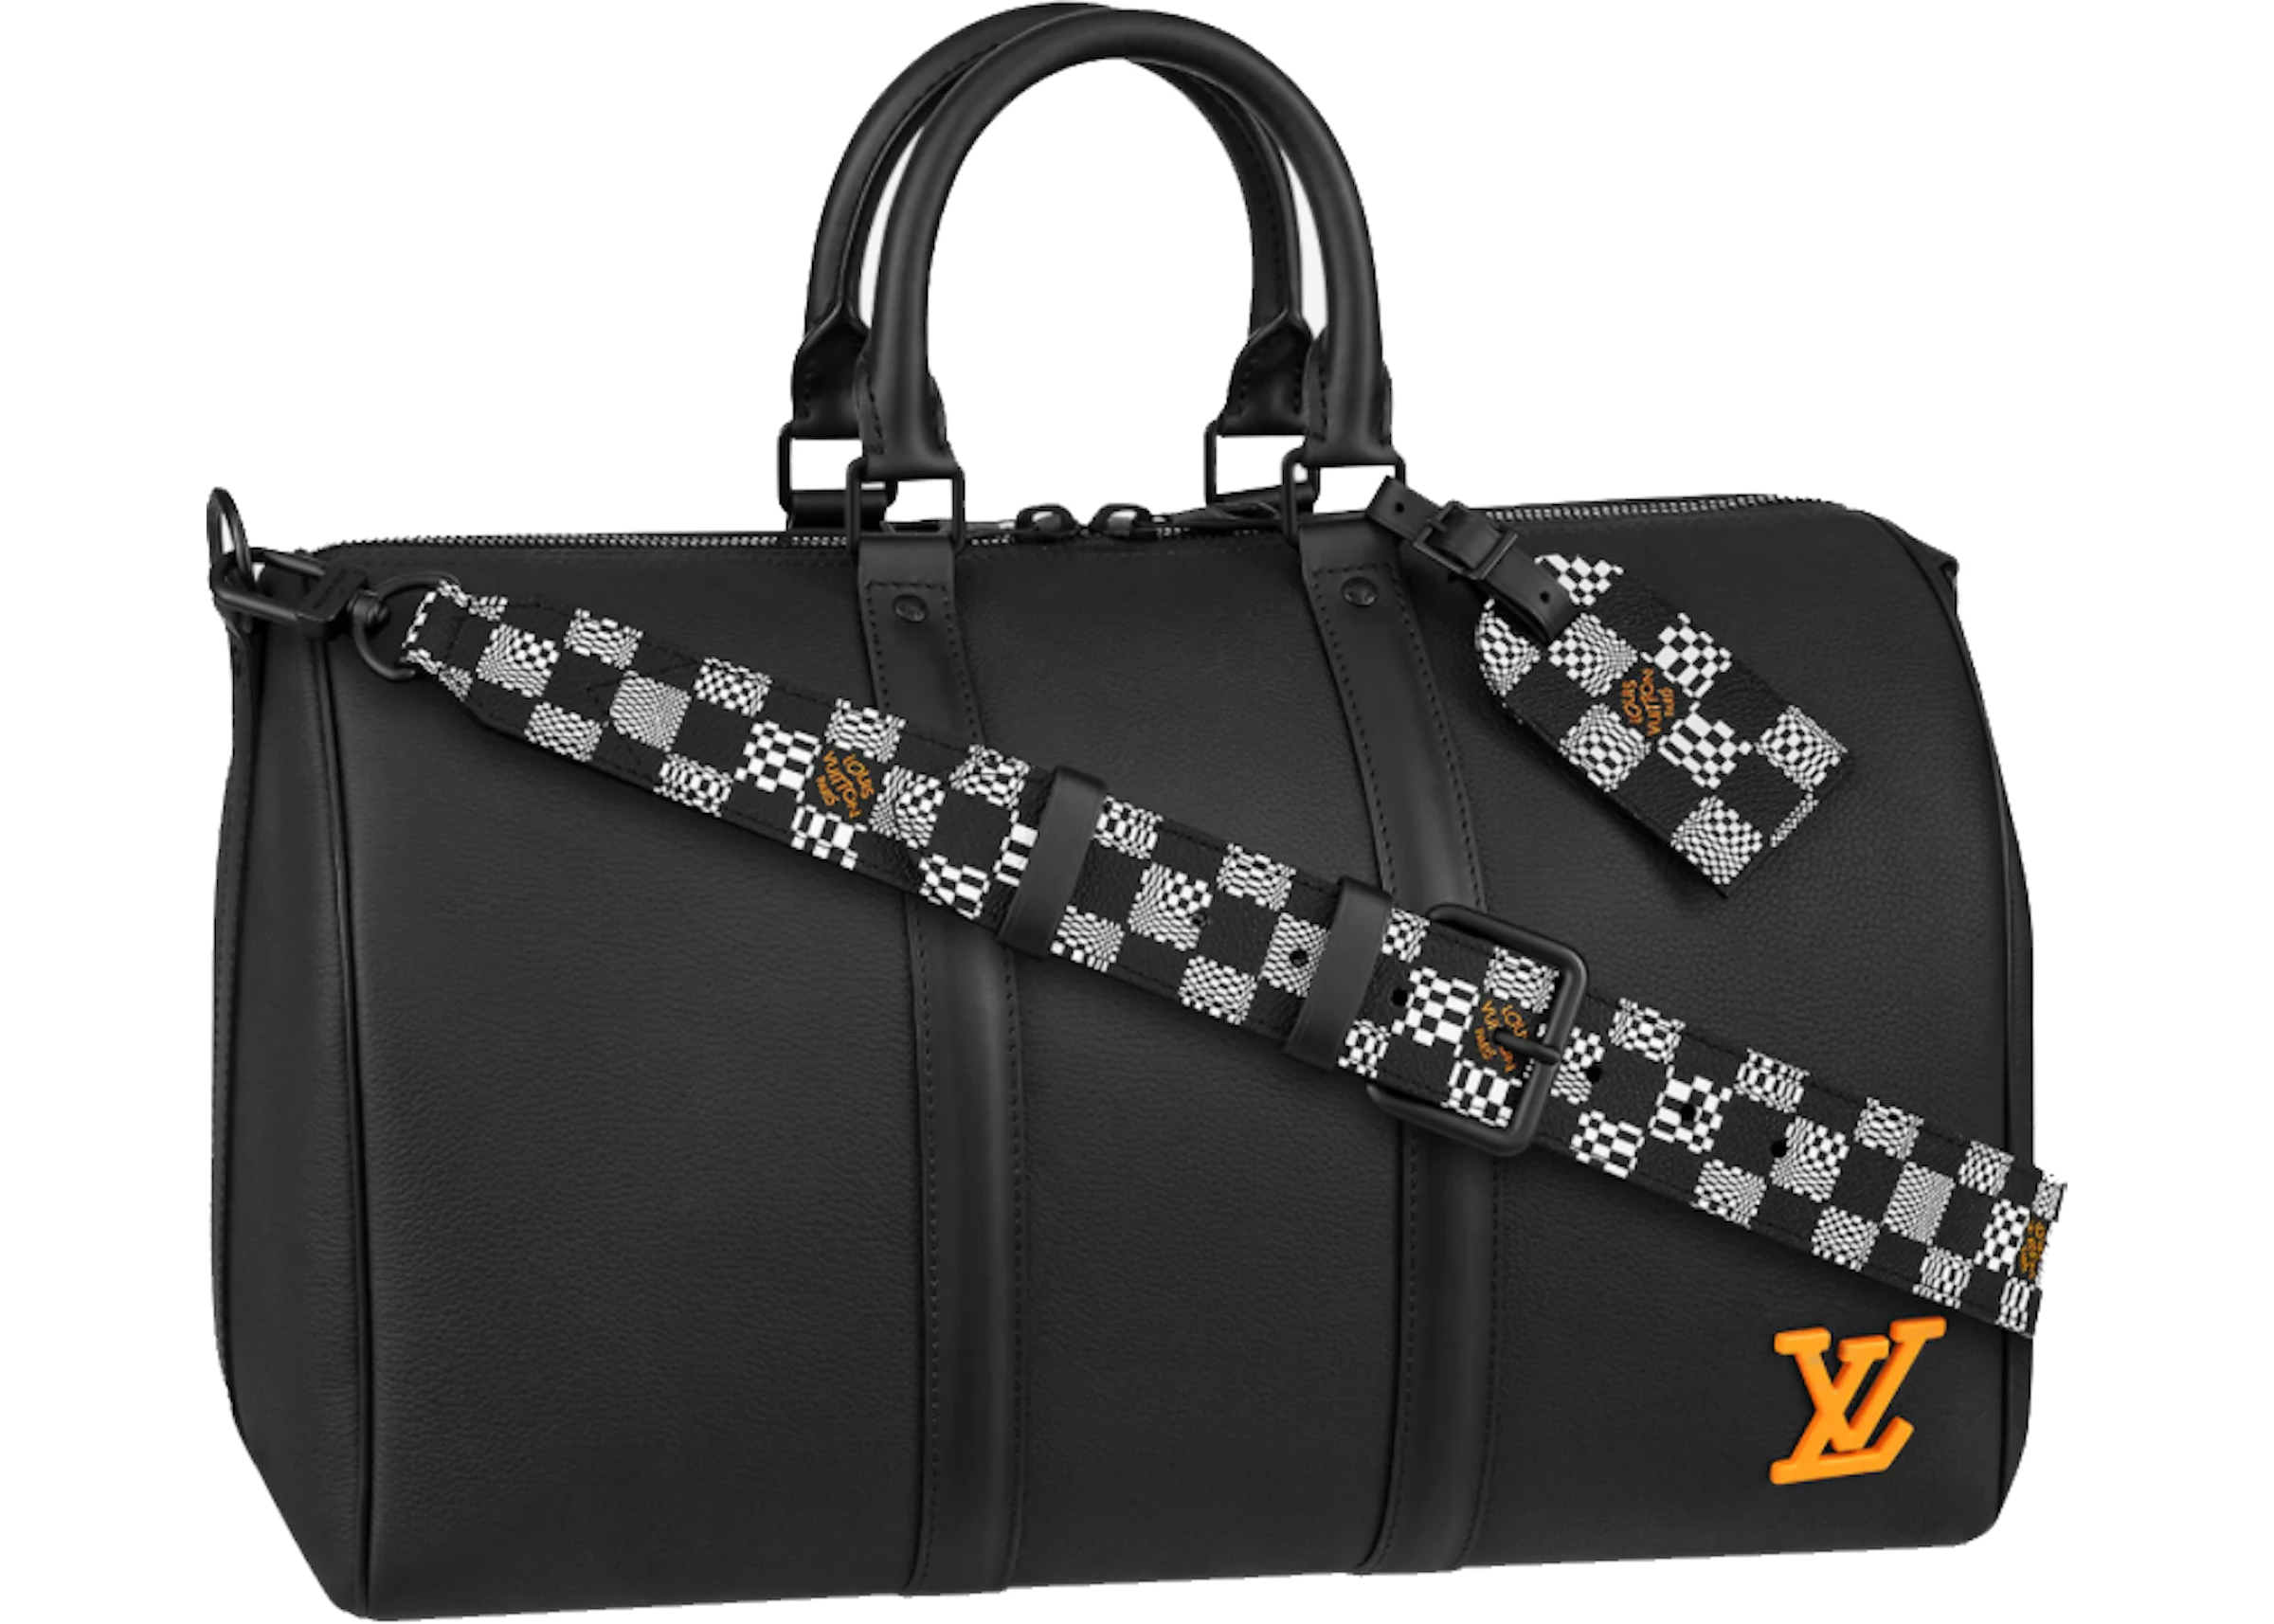 Buy Louis Vuitton Keepall Bags - StockX